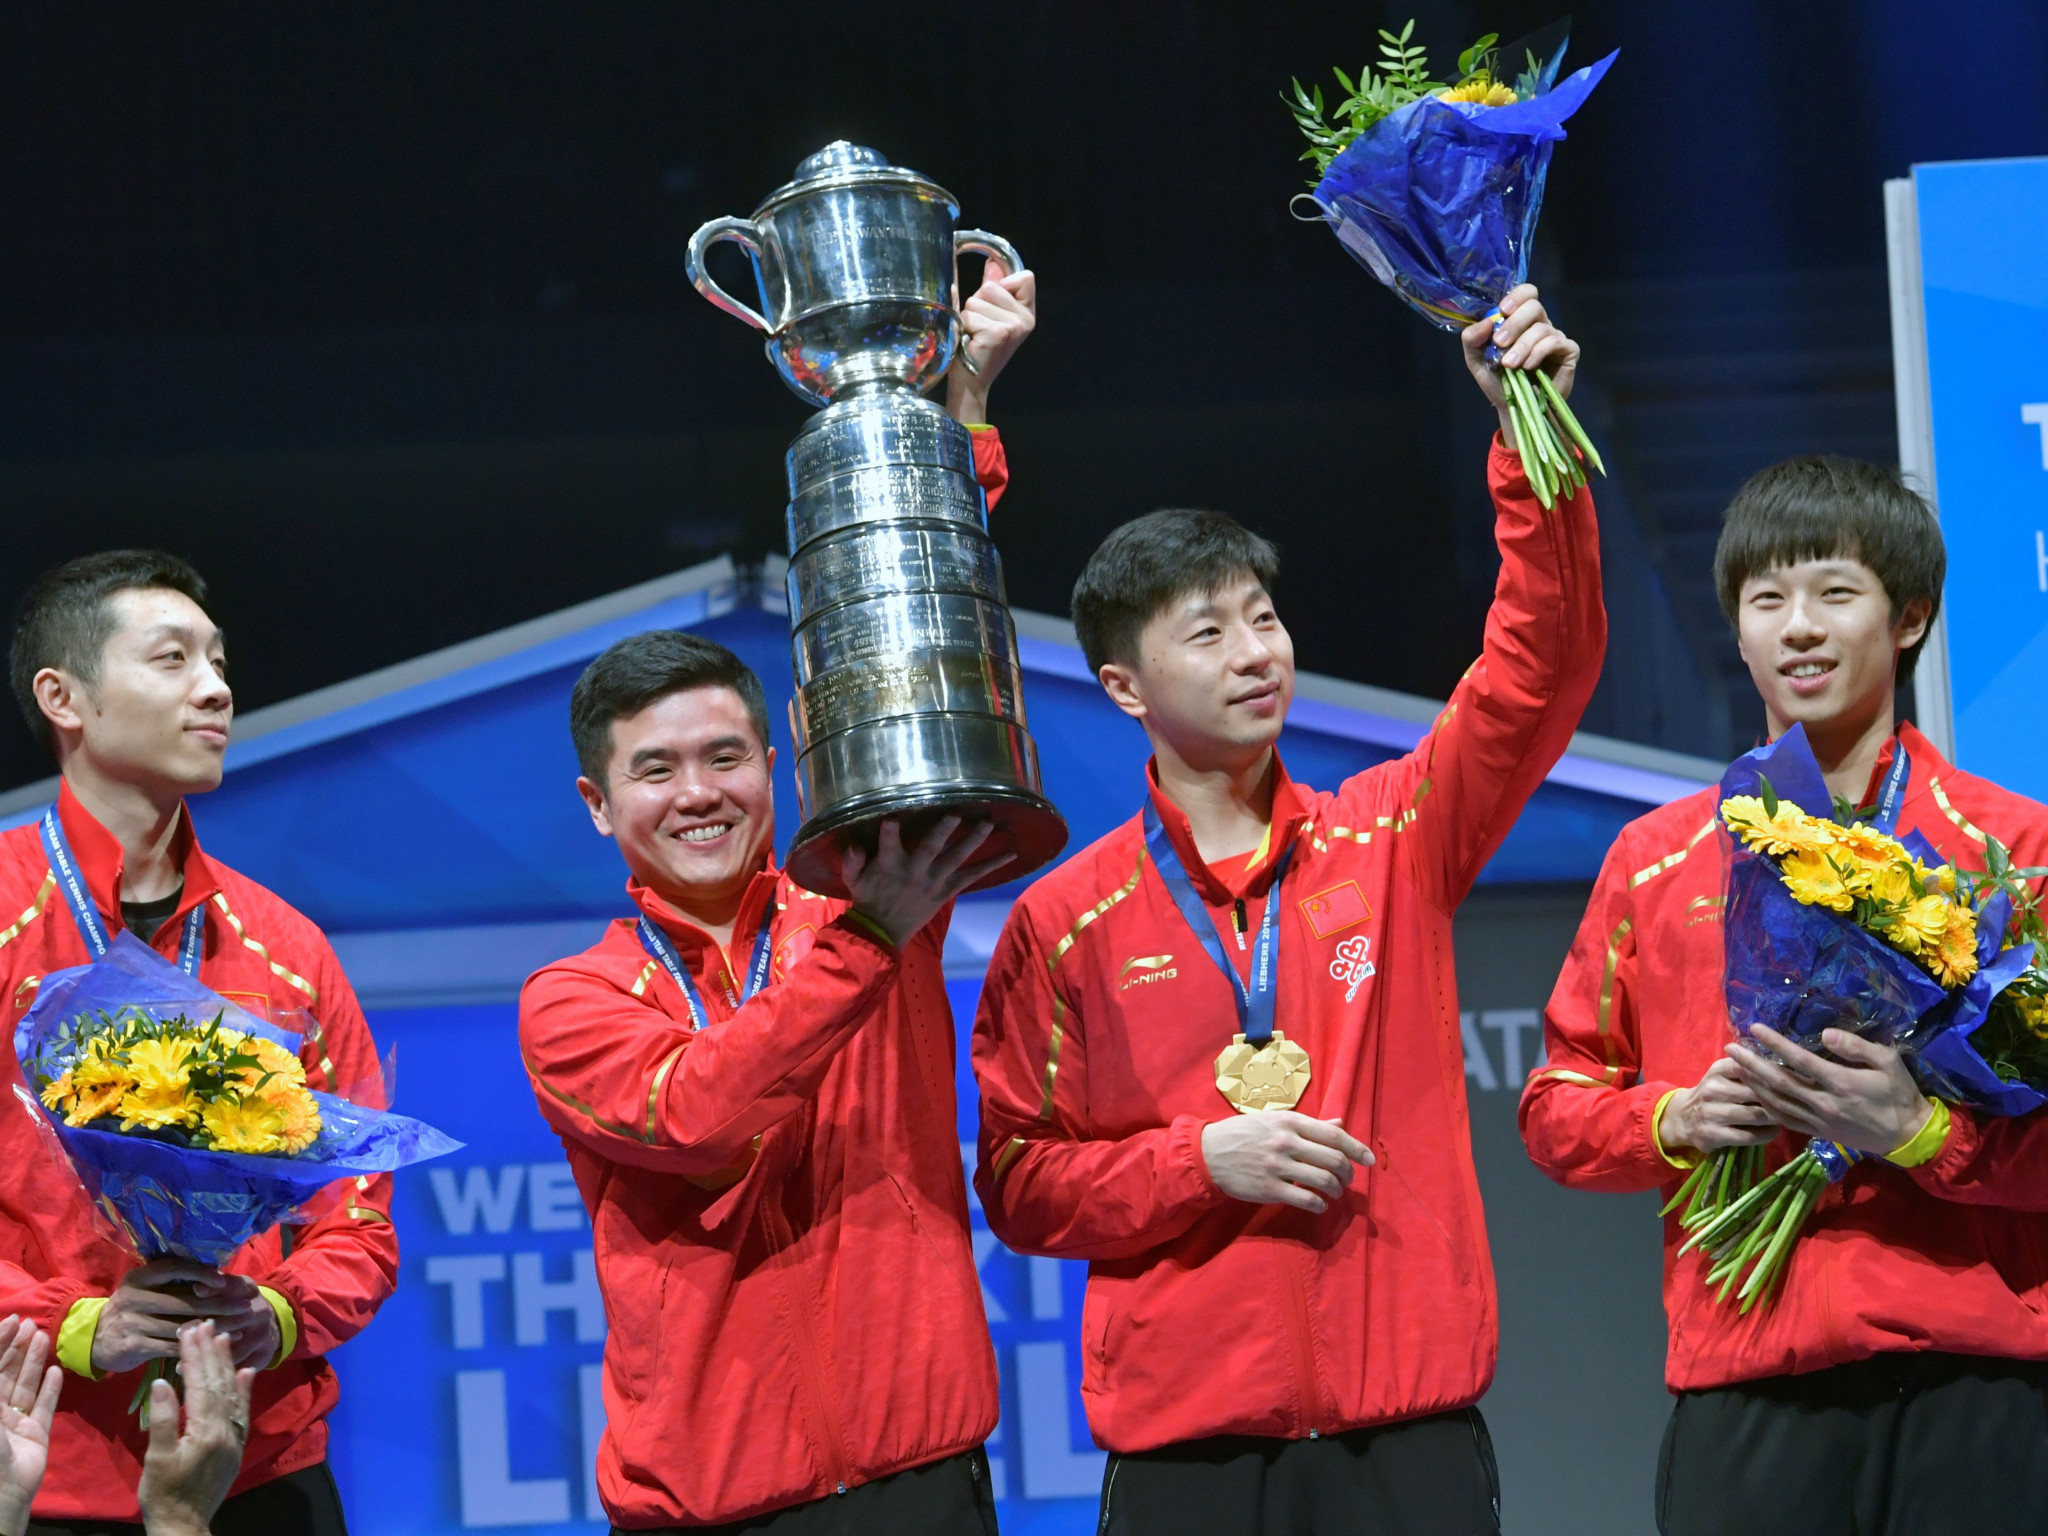 World Team Table Tennis Championships preparations "continuing as planned" in Chengdu despite threat of COVID-19